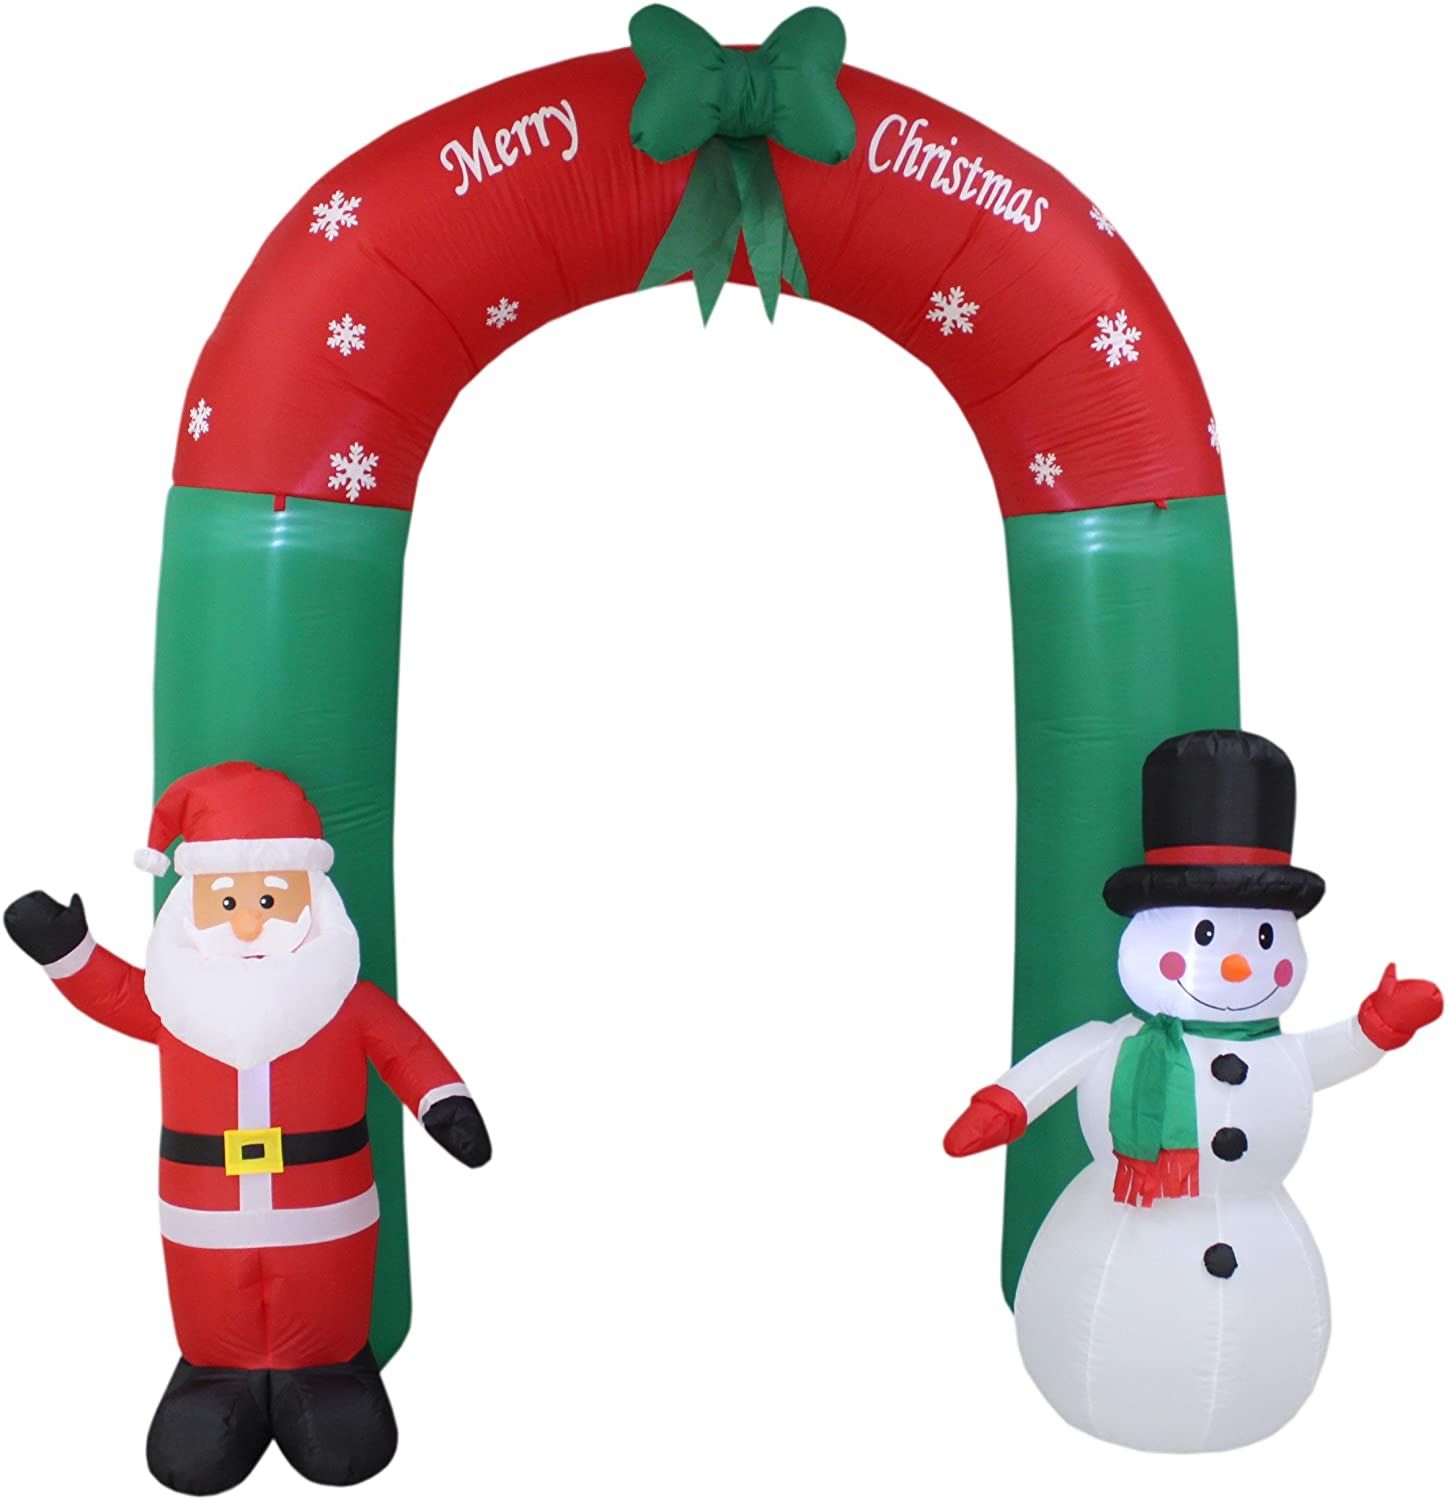 Lighted Christmas Inflatable Santa Claus and Snowman Archway